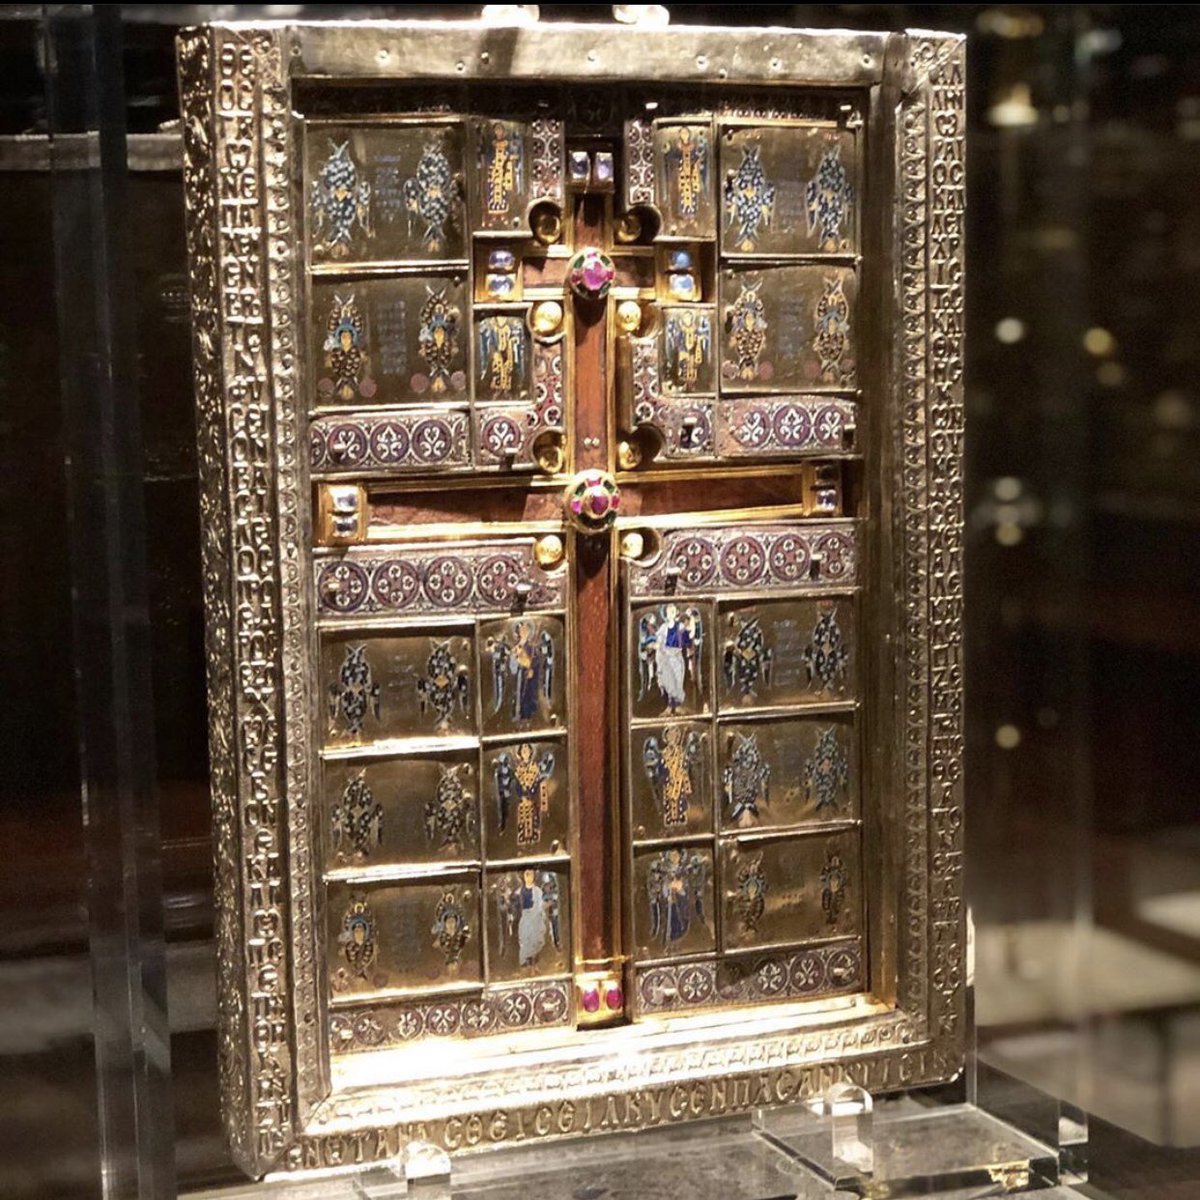 A 3D puzzle with moveable parts of collected holy matter, contained in a precious jewel box commissioned by a bastard eunuch, which itself was processed through space. The Limburg Staurotheke may be one of the most moving things I’ve ever seen.   #MedievalTwitter  #byzantineart